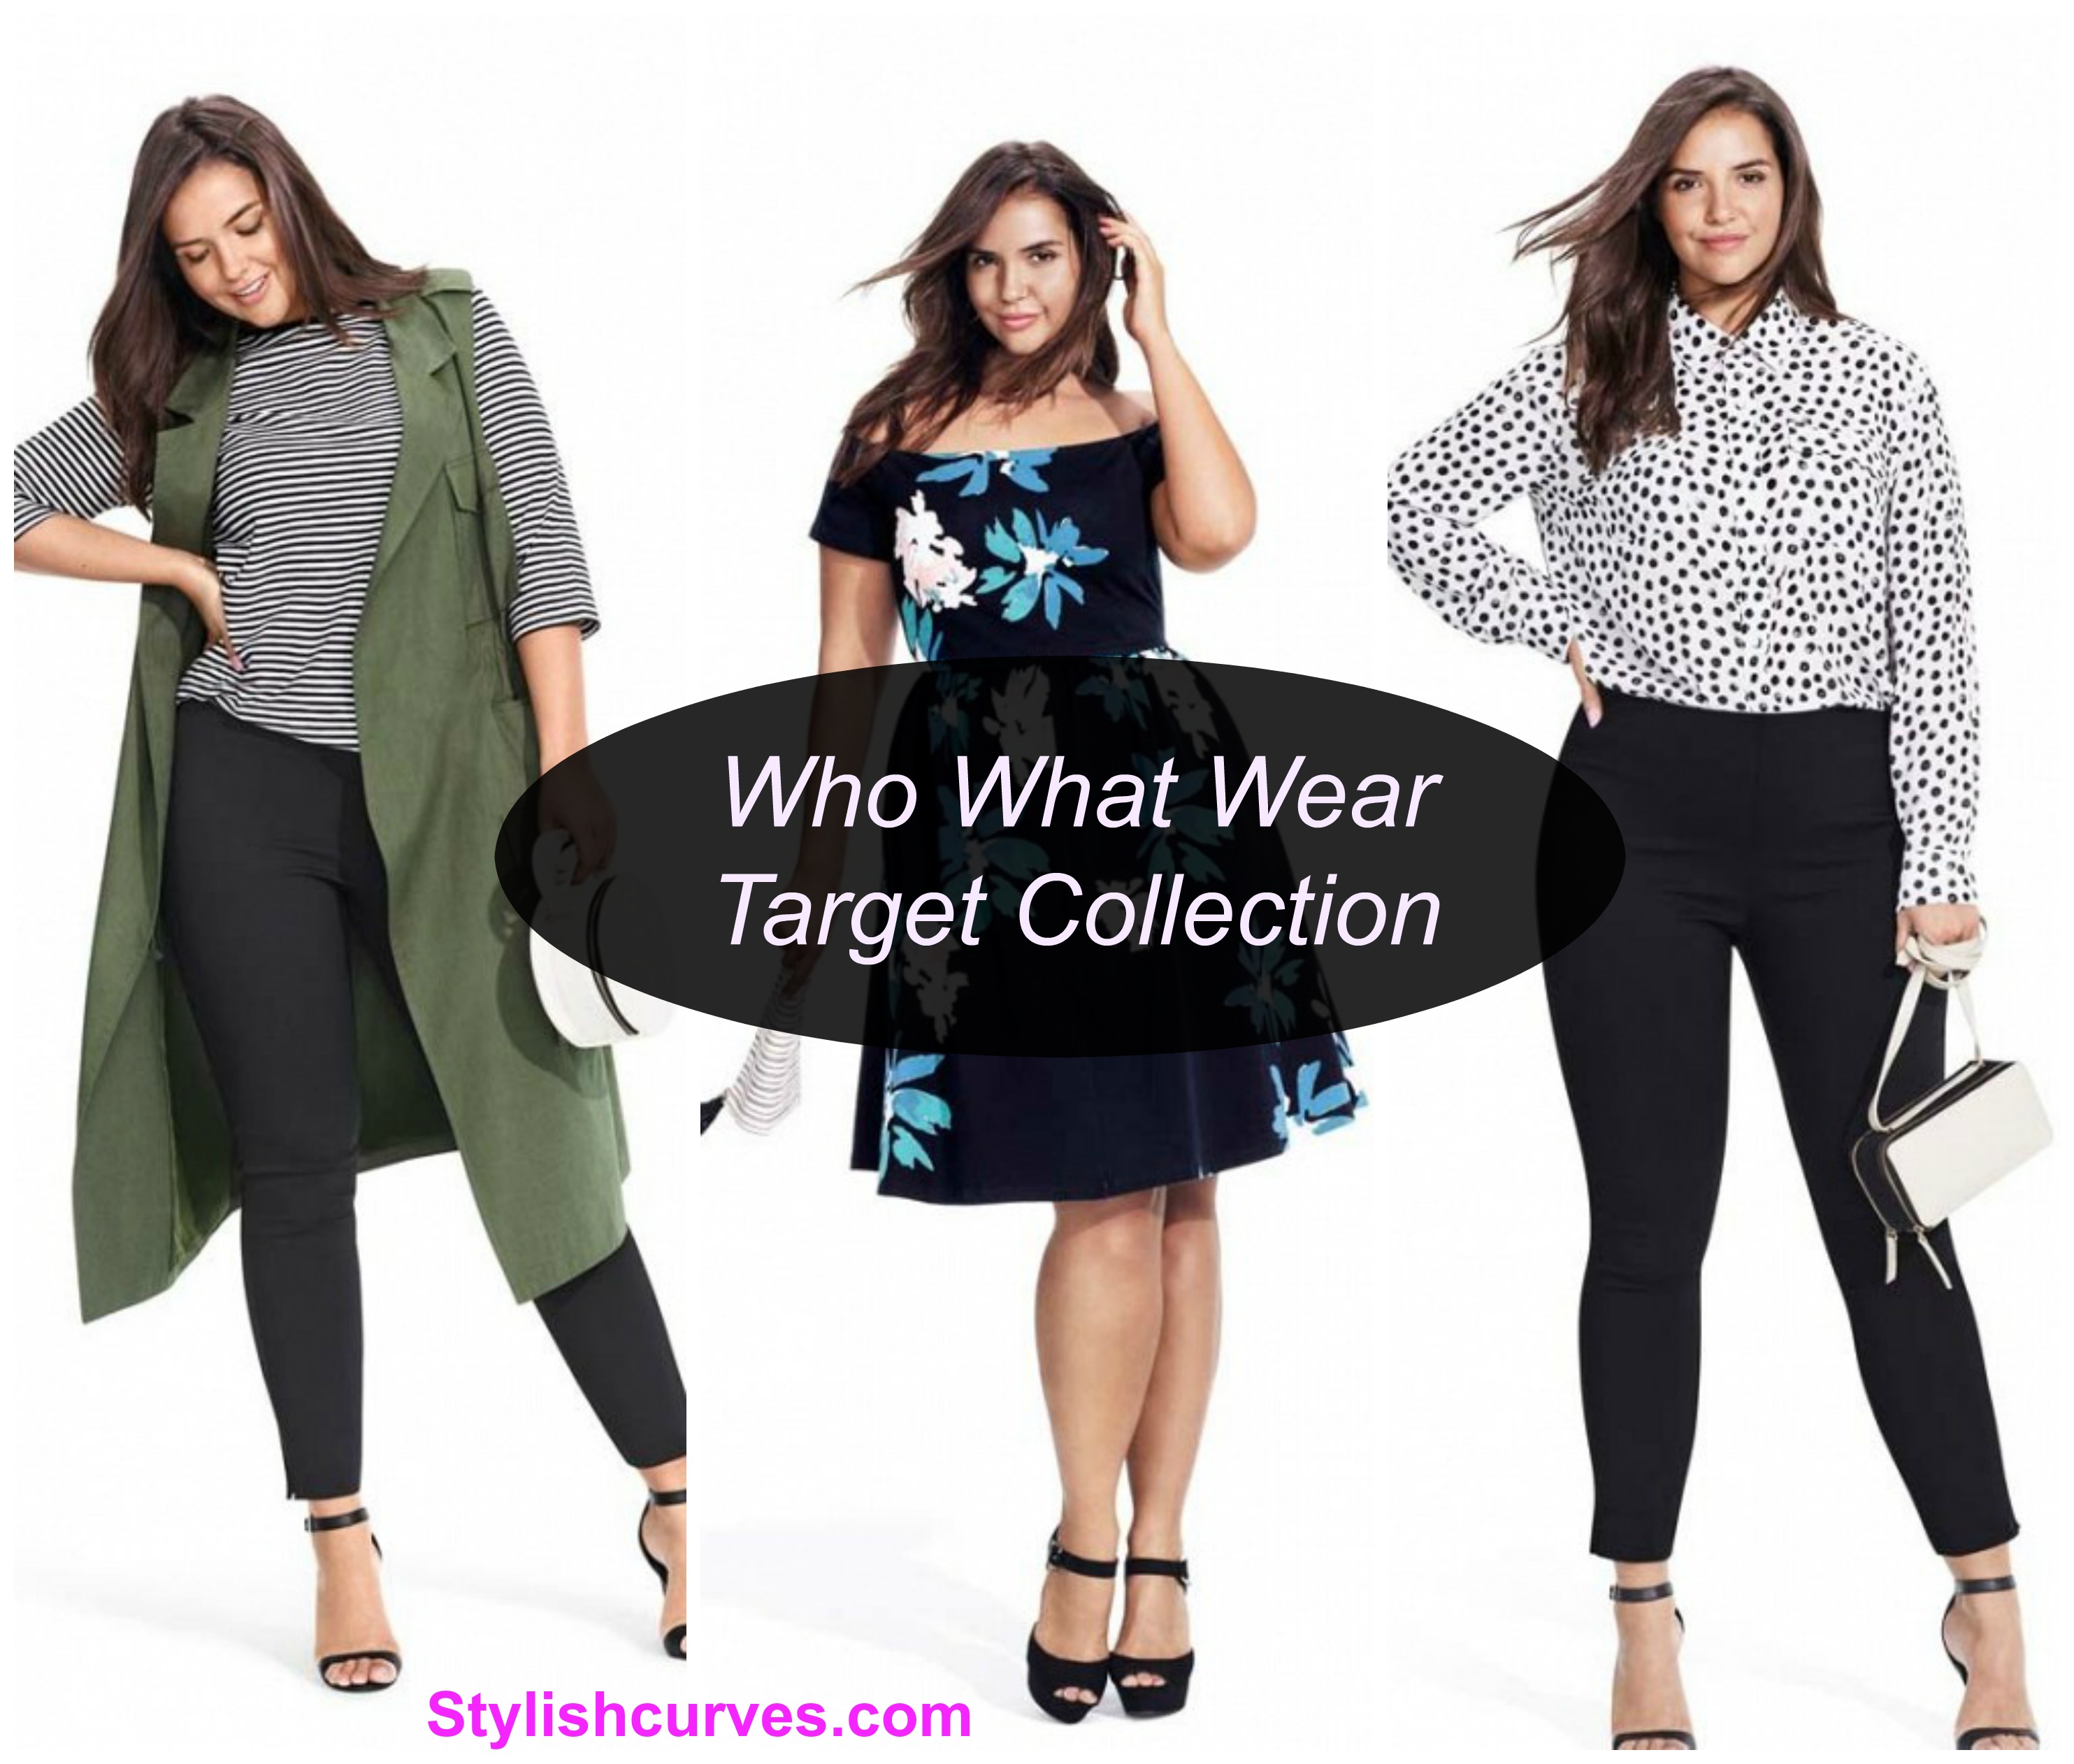 Who What Wear Target Collection Includes Plus Sizes | Stylish Curves